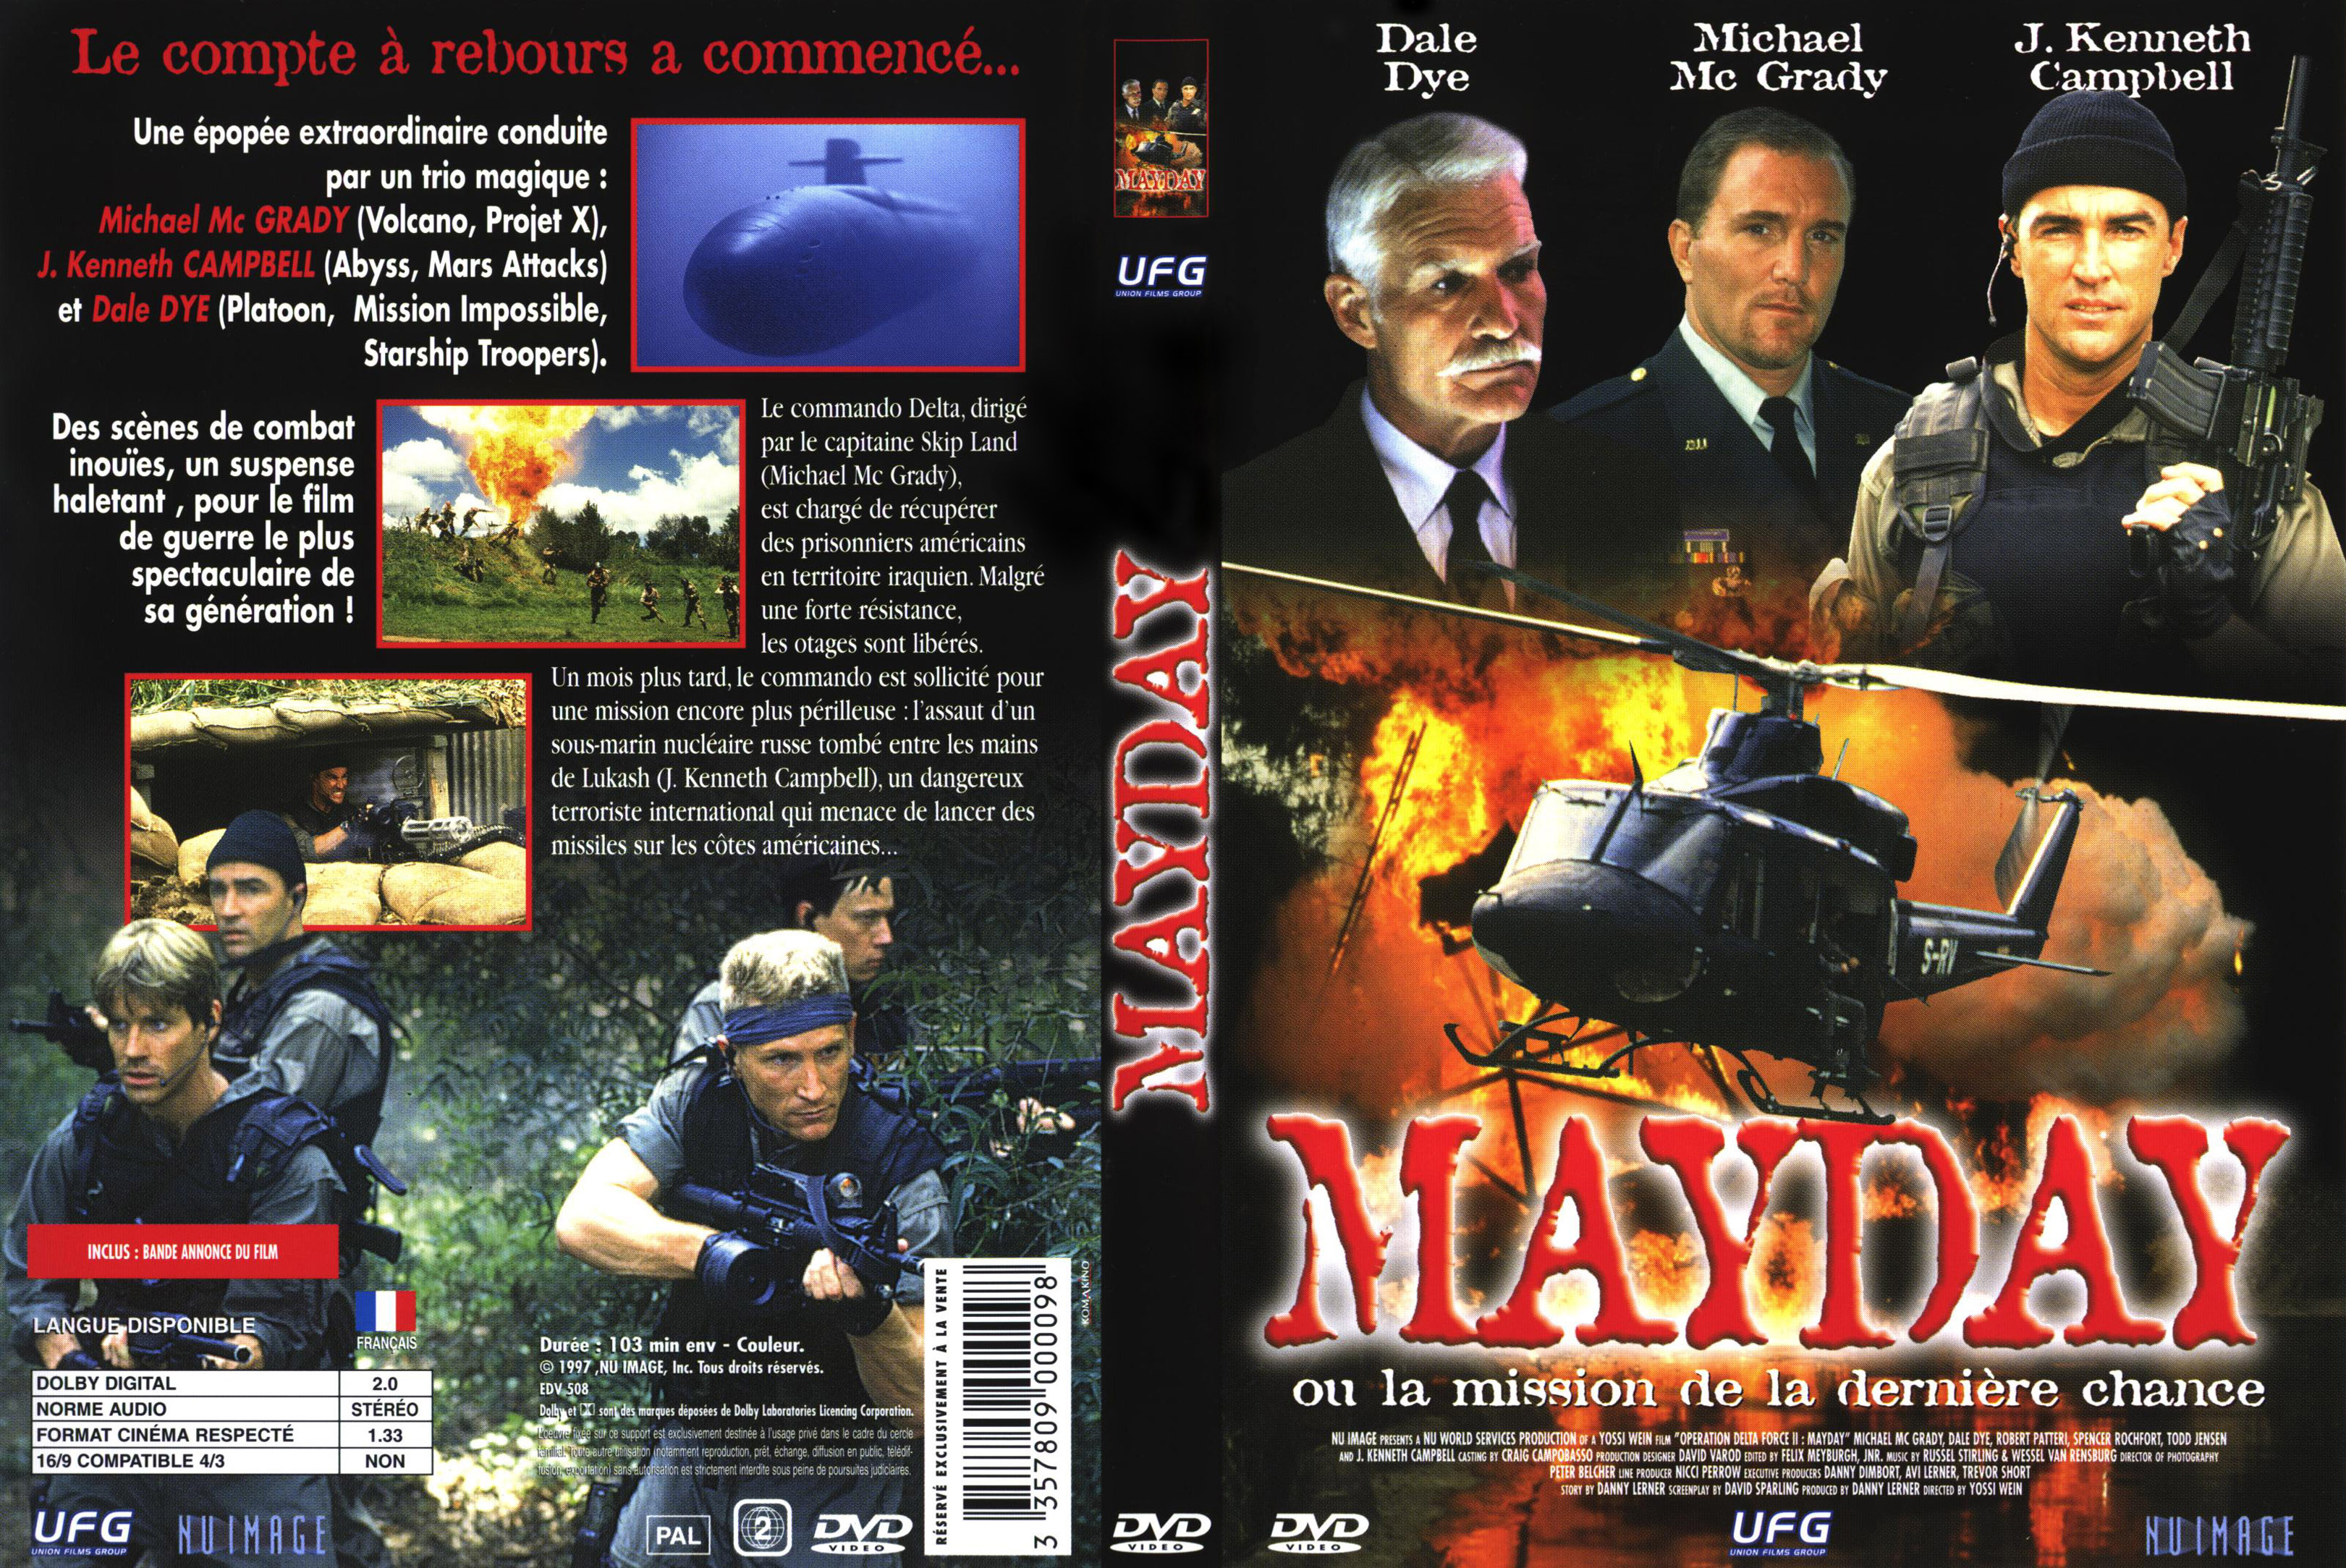 Jaquette DVD Mayday